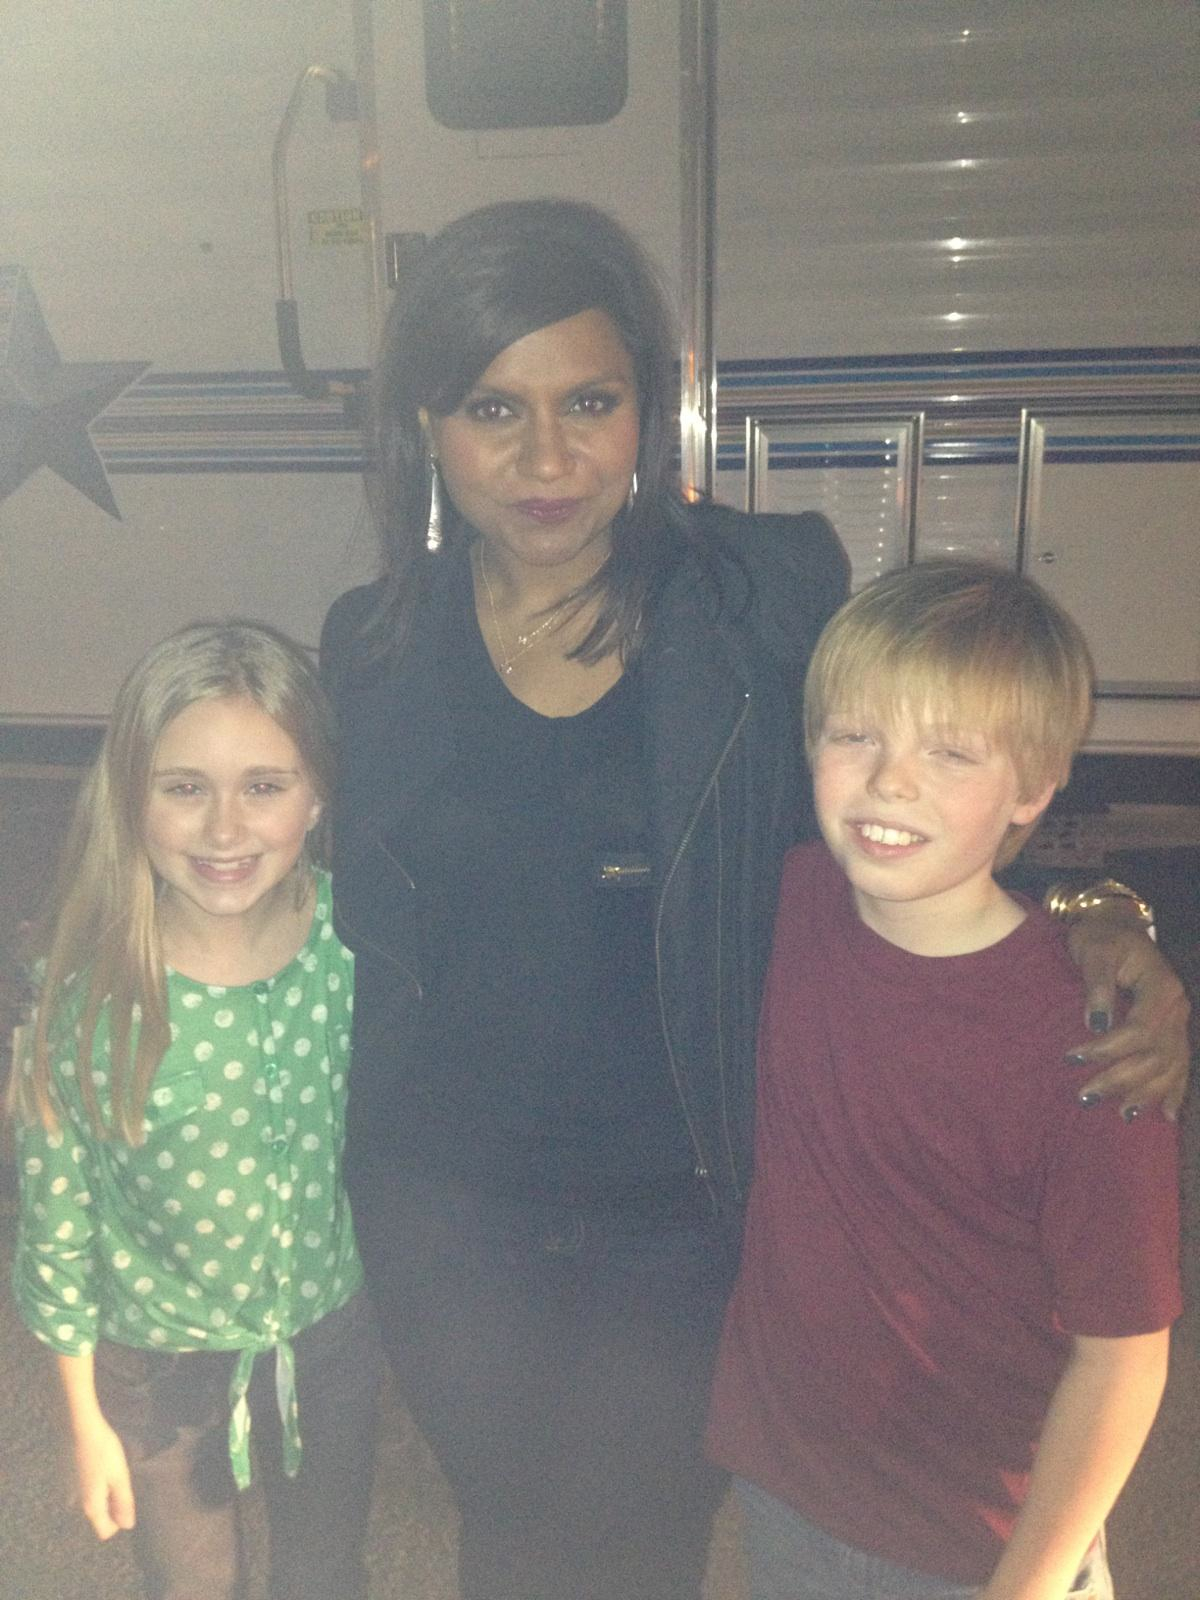 Emily and Tristan on the Mindy Project, March, 2013!